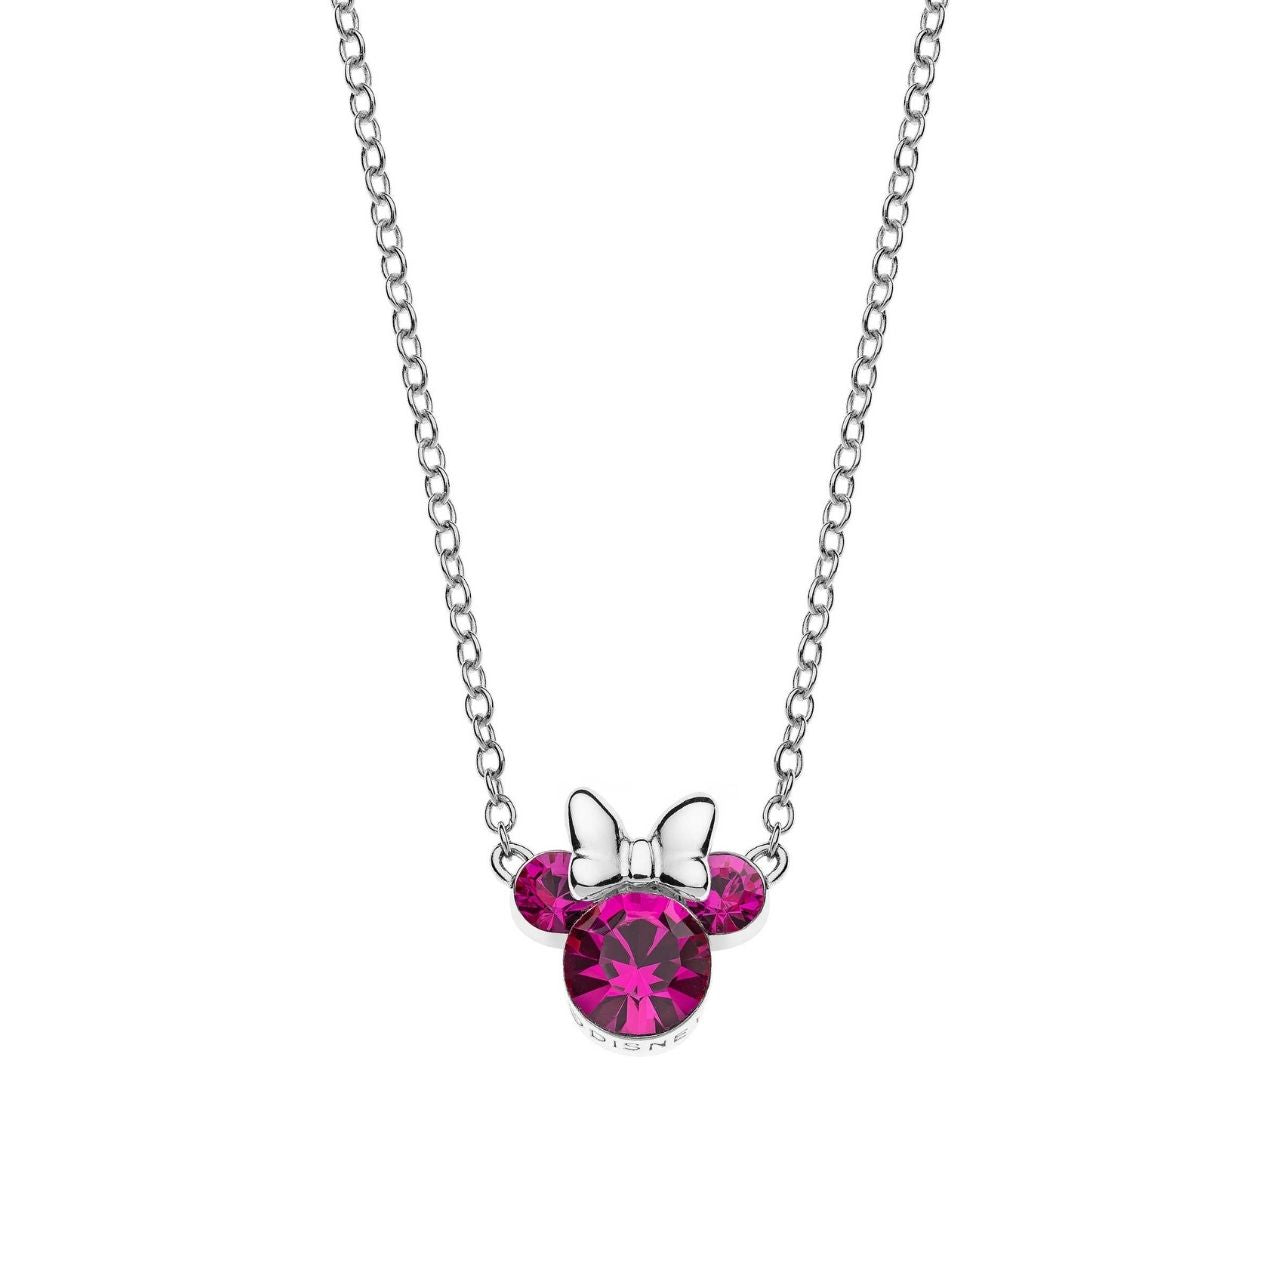 Disney Minnie Silver CZ Pink Stone Pendant Necklace  Stunning silver Pendant Necklace form a silhouette of Minnie Mouse's with silver bow and Pink CZ Crystals adding a feminine touch to the Disney classic piece of Jewellery.  Trendy and fashionable silver design, the Disney Minnie Mouse Silhouette Sterling Silver pendant with pink CZ crystals add a chic, fun touch to any outfit.